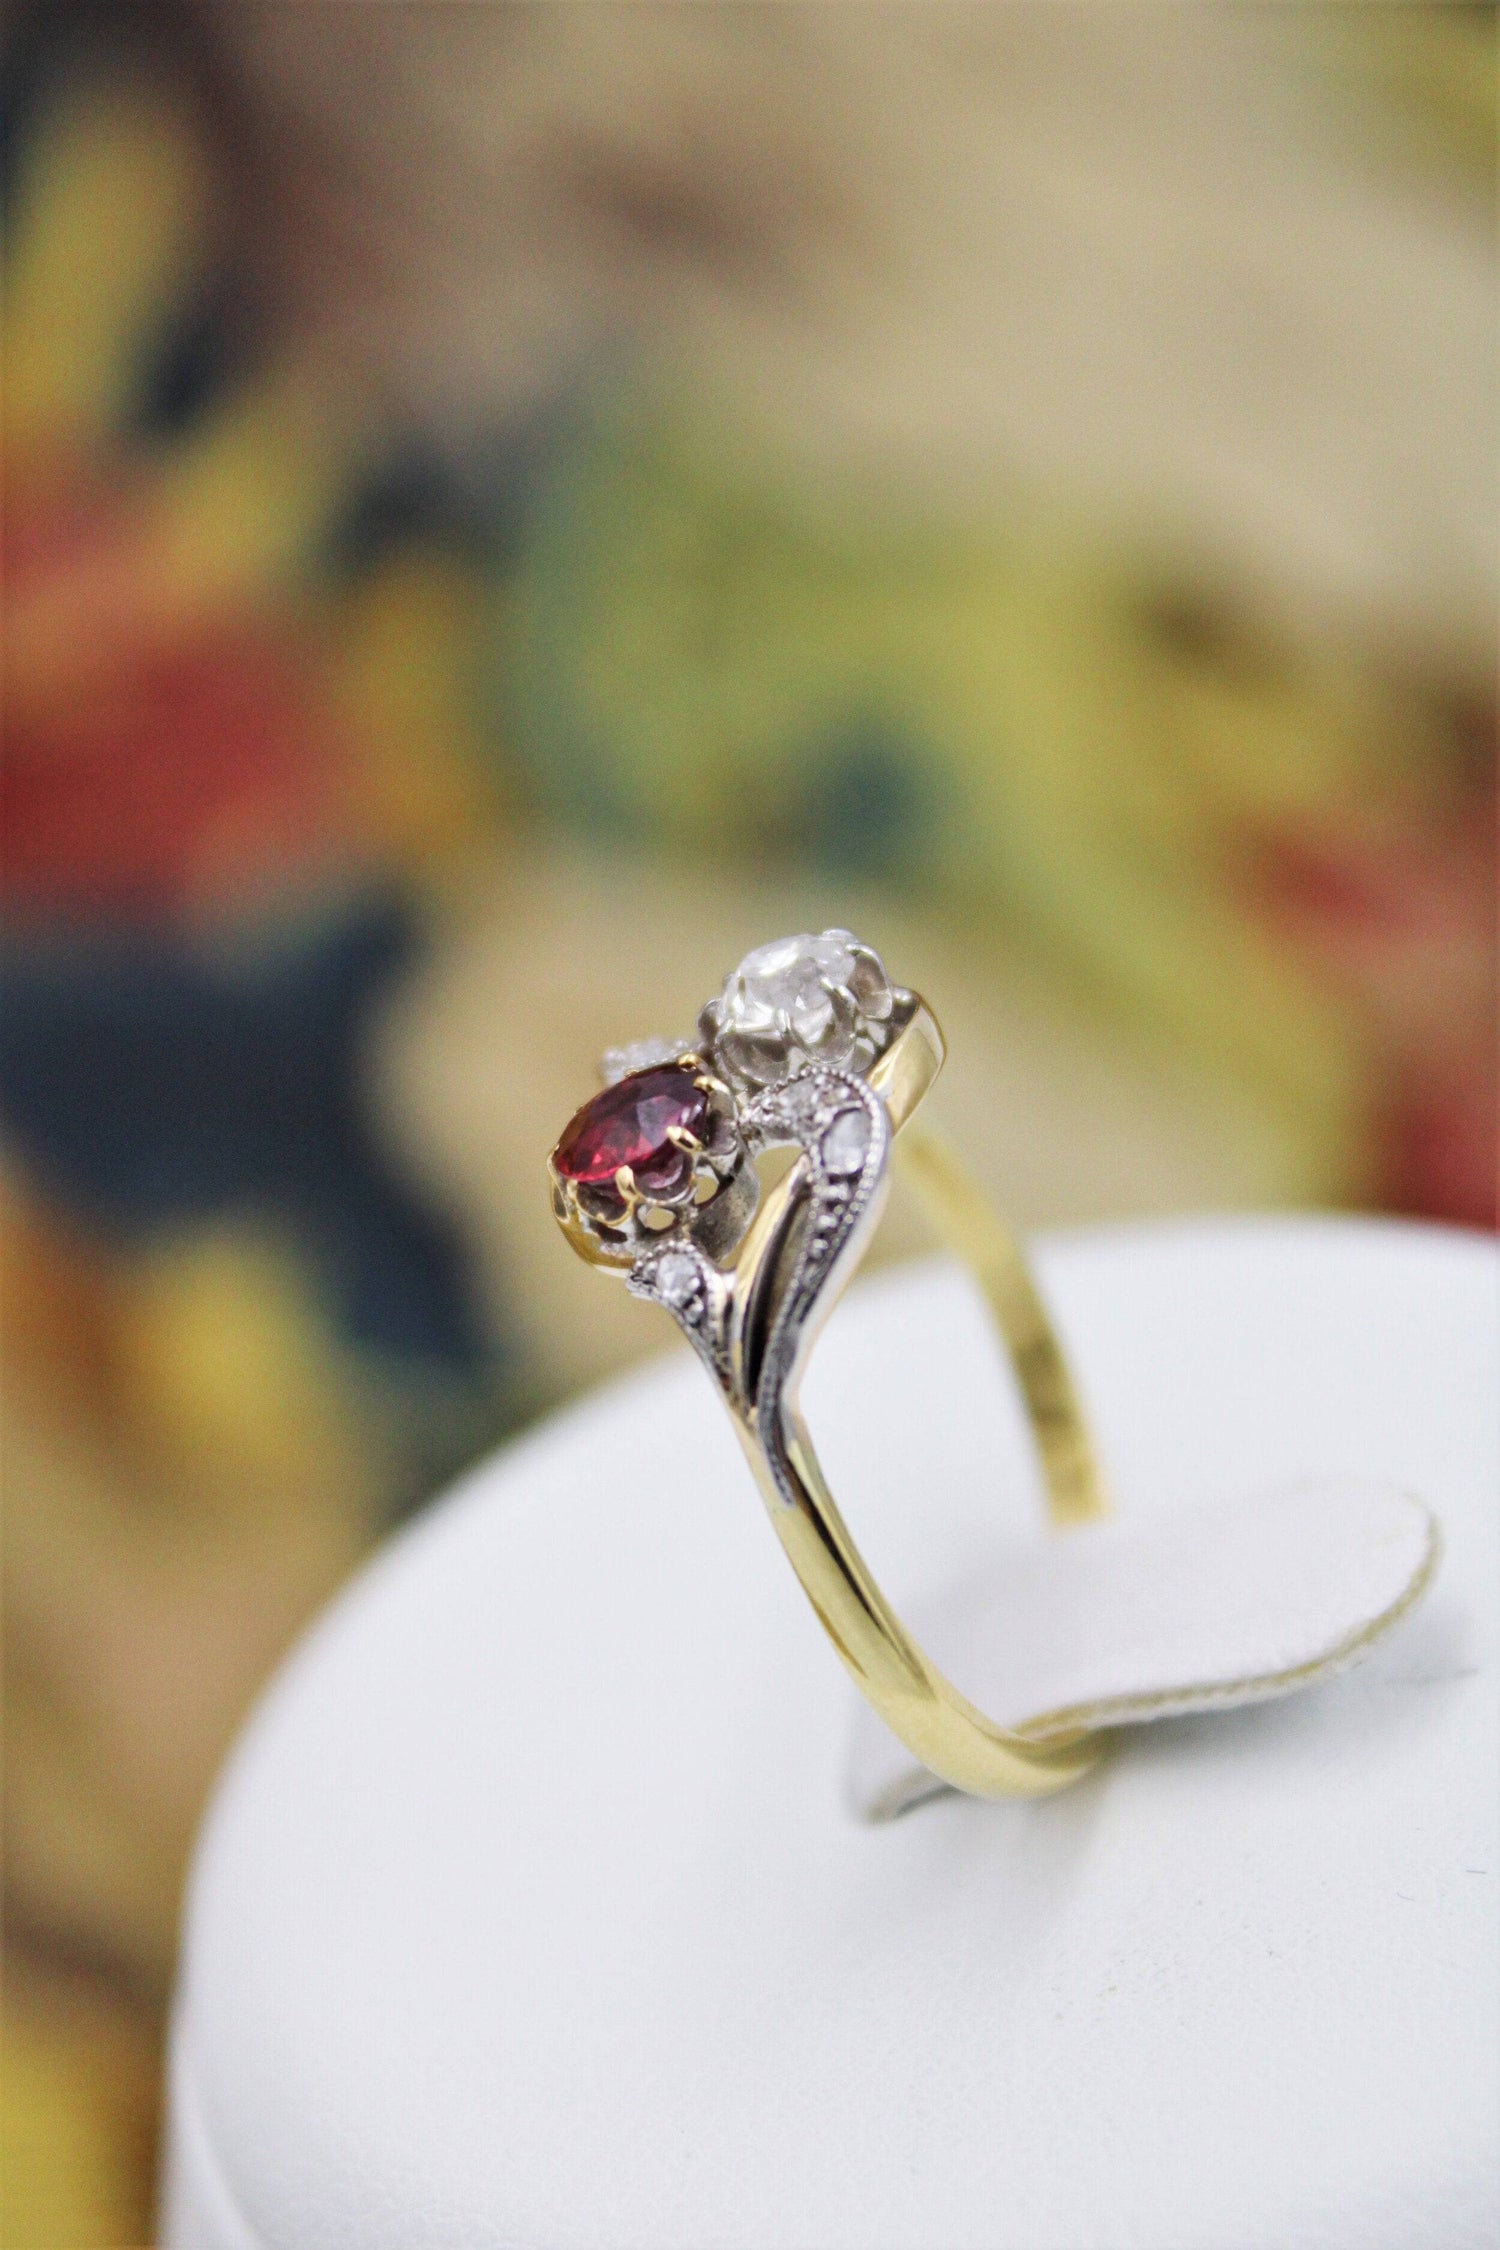 A very fine Art Nouveau Ruby & Diamond Twist Ring in 18 Carat Yellow Gold &amp; Platinum tipped (tested), Circa 1905 - Robin Haydock Antiques